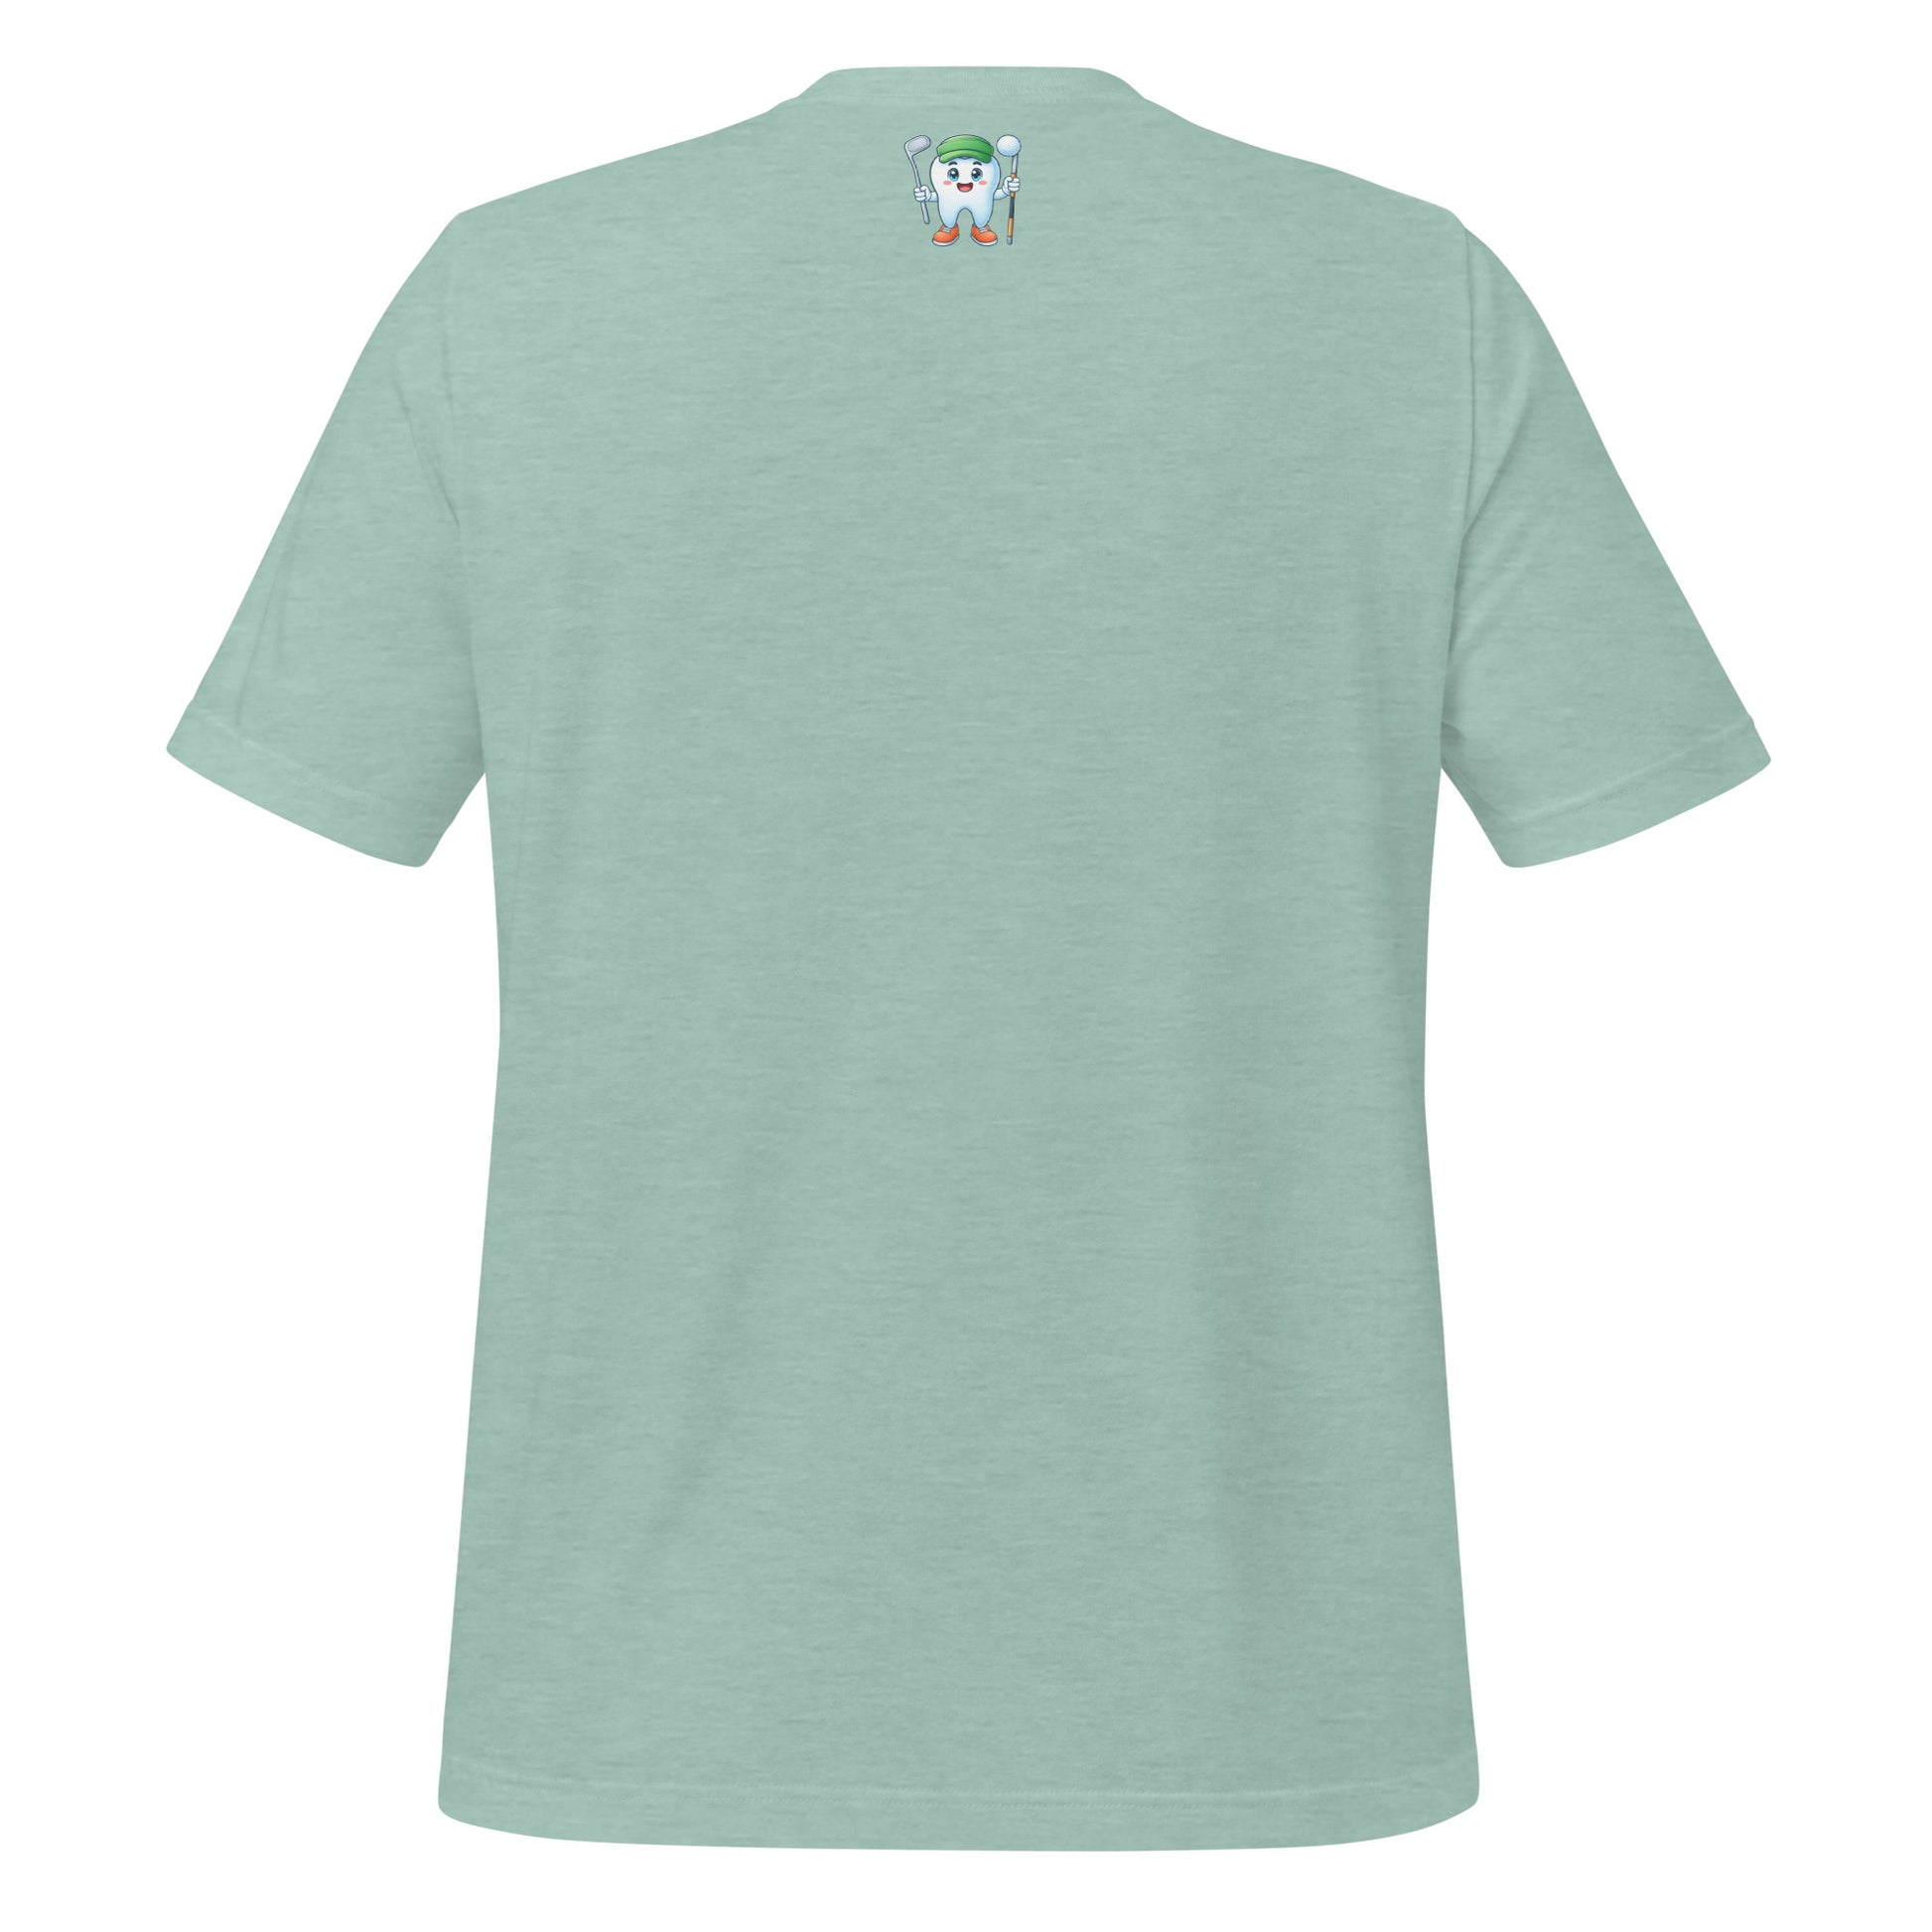 Cute dentist t-shirt showcasing an adorable tooth character in golf attire, joyfully celebrating a ‘hole in one’ achievement, perfect for dentist and dental professionals seeking unique and thematic dental apparel. Heather prism dusty blue color, back view.